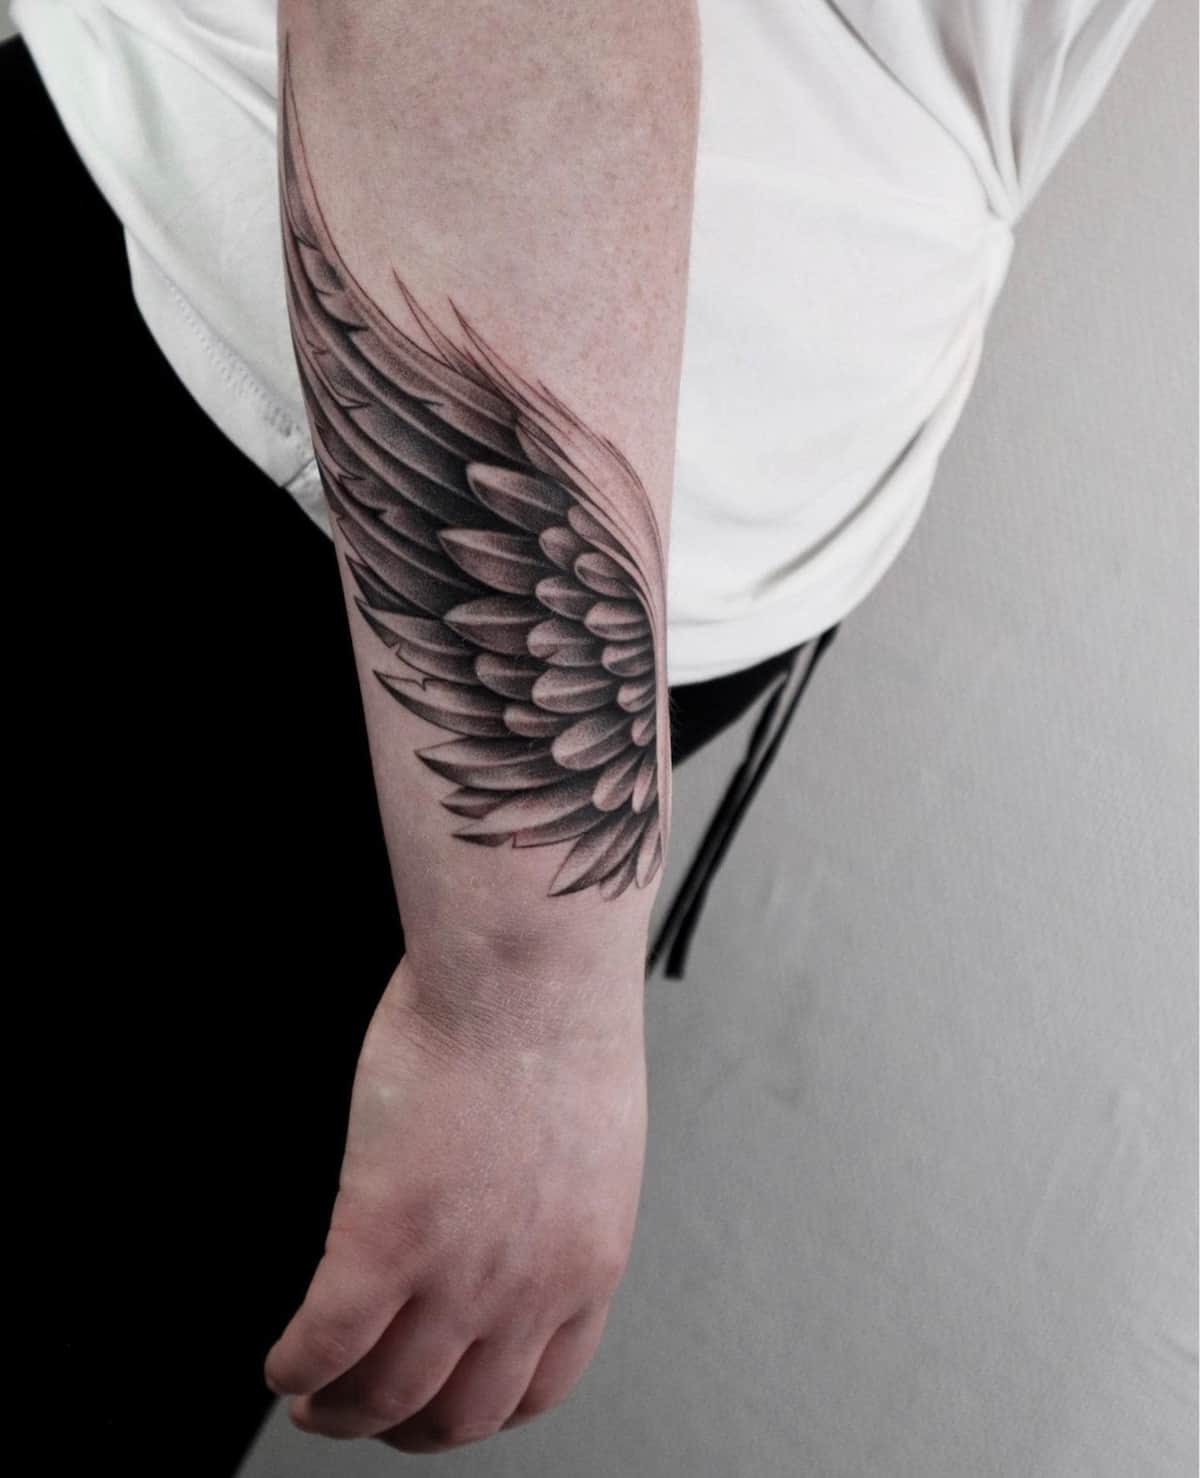 Surreal wings tattoos that never go out of fashion